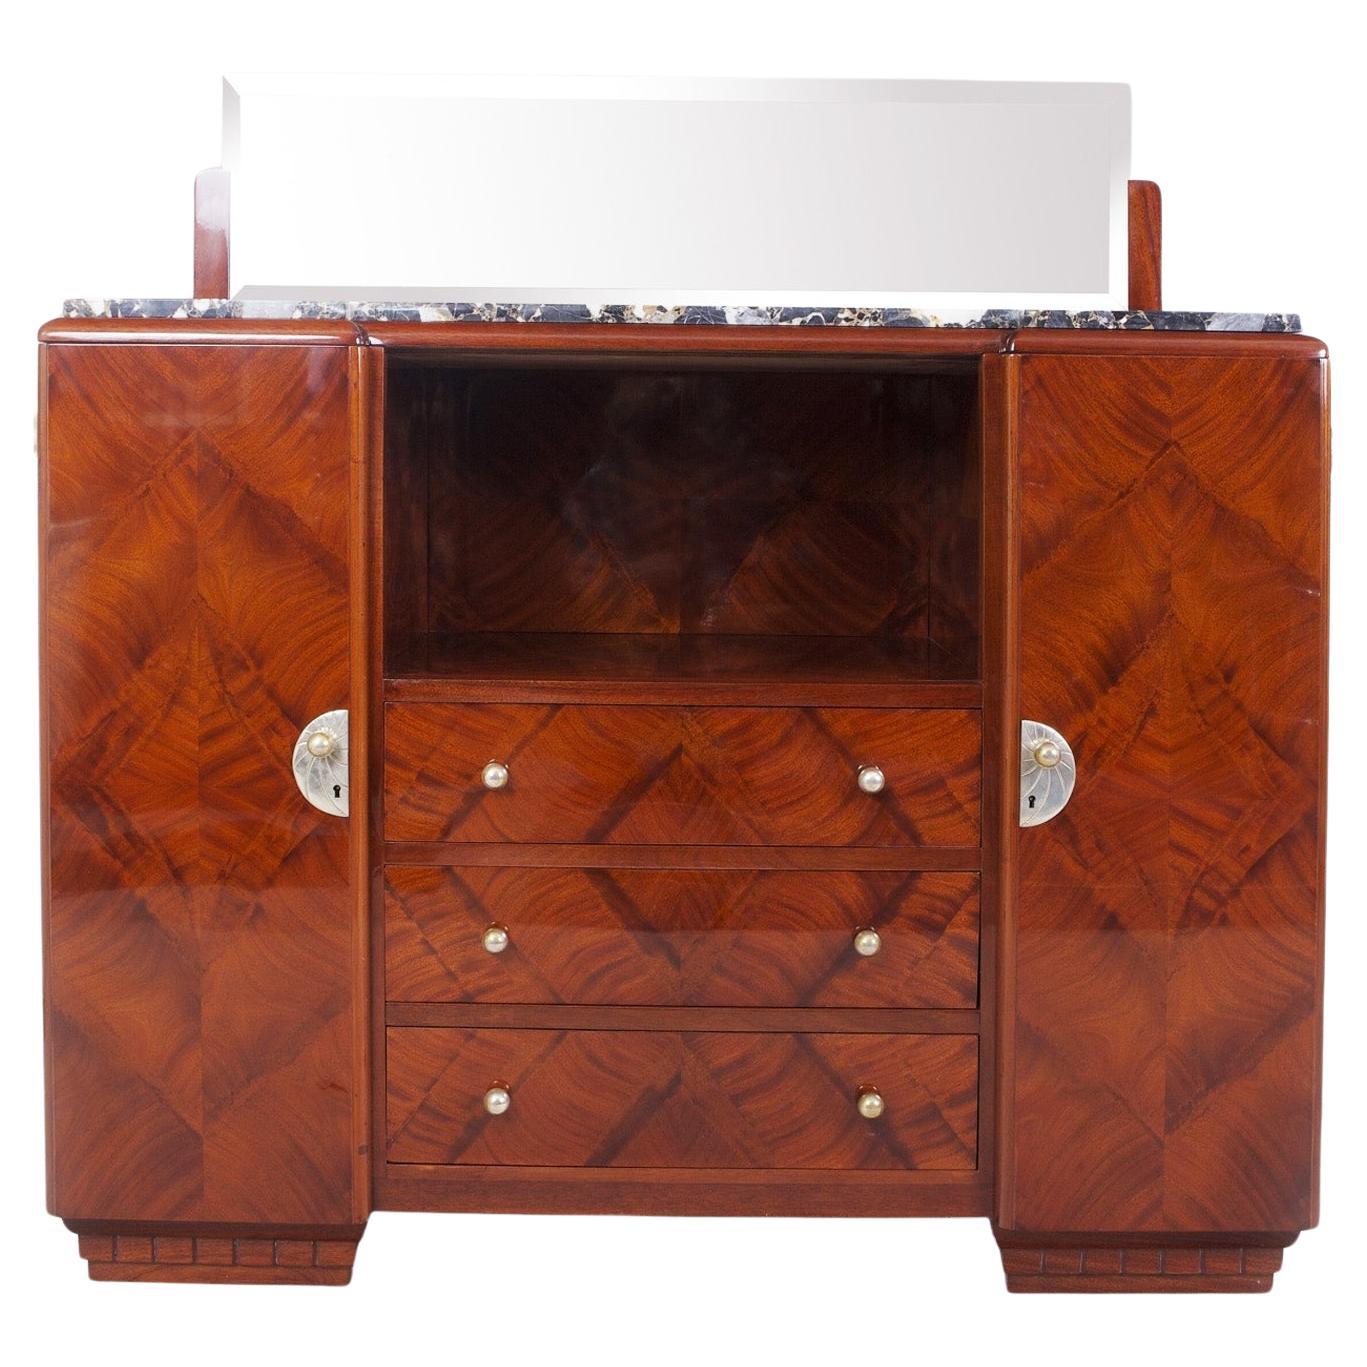 French Art Deco Sideboard with Marble Top and Mirror, 1920s, Mahogany For Sale